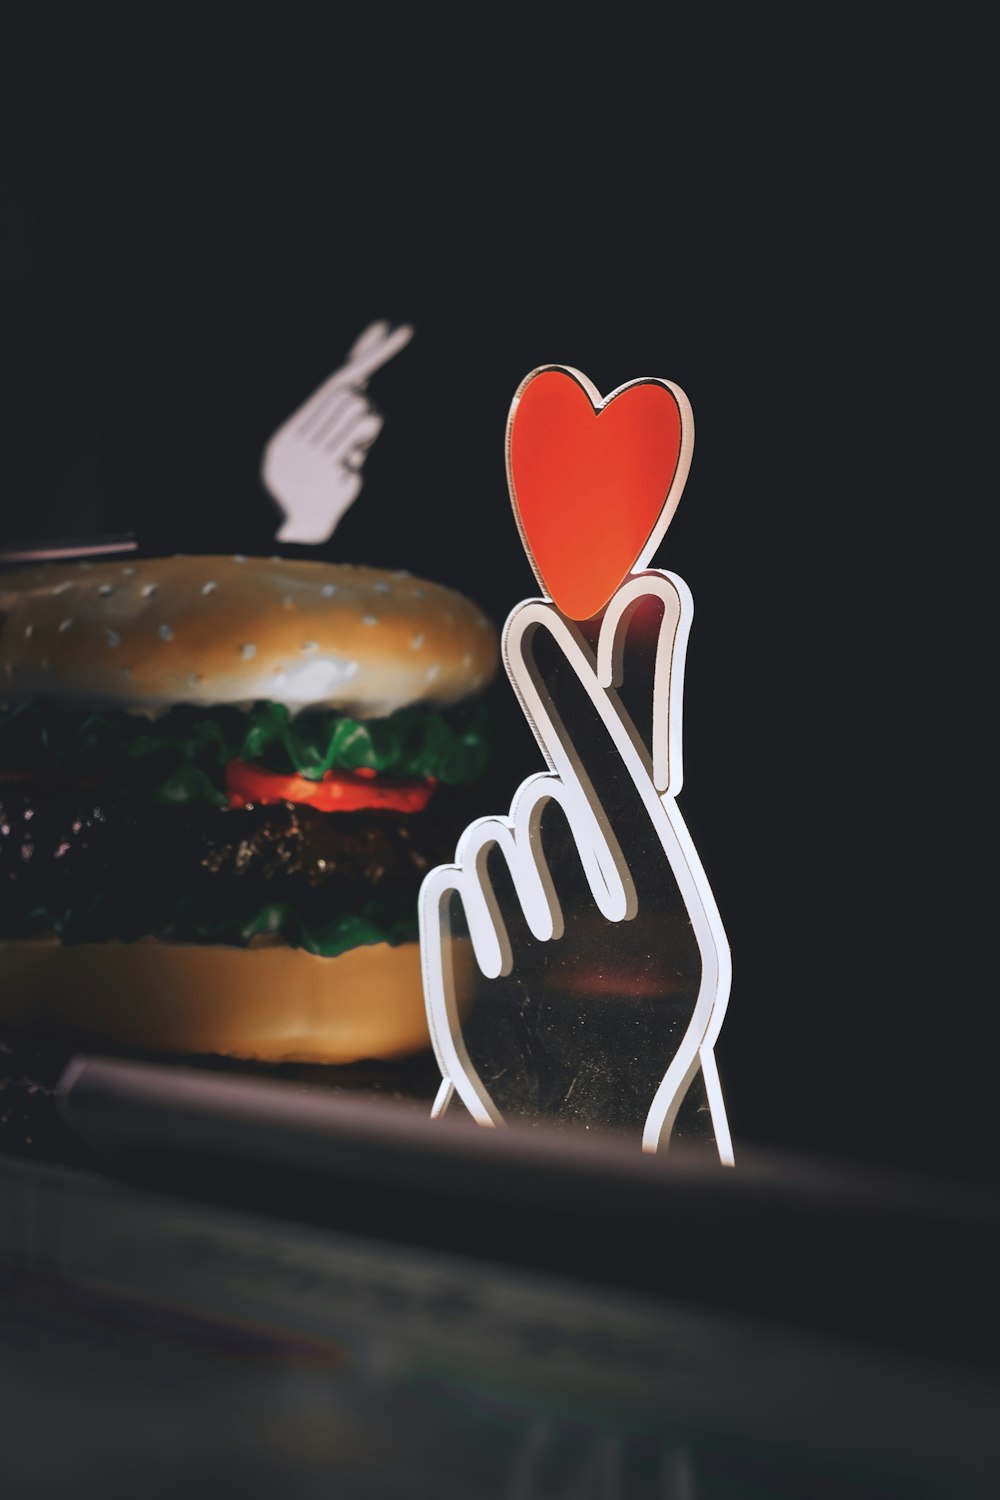 a hand holding a heart shaped paper cut out of a hamburger